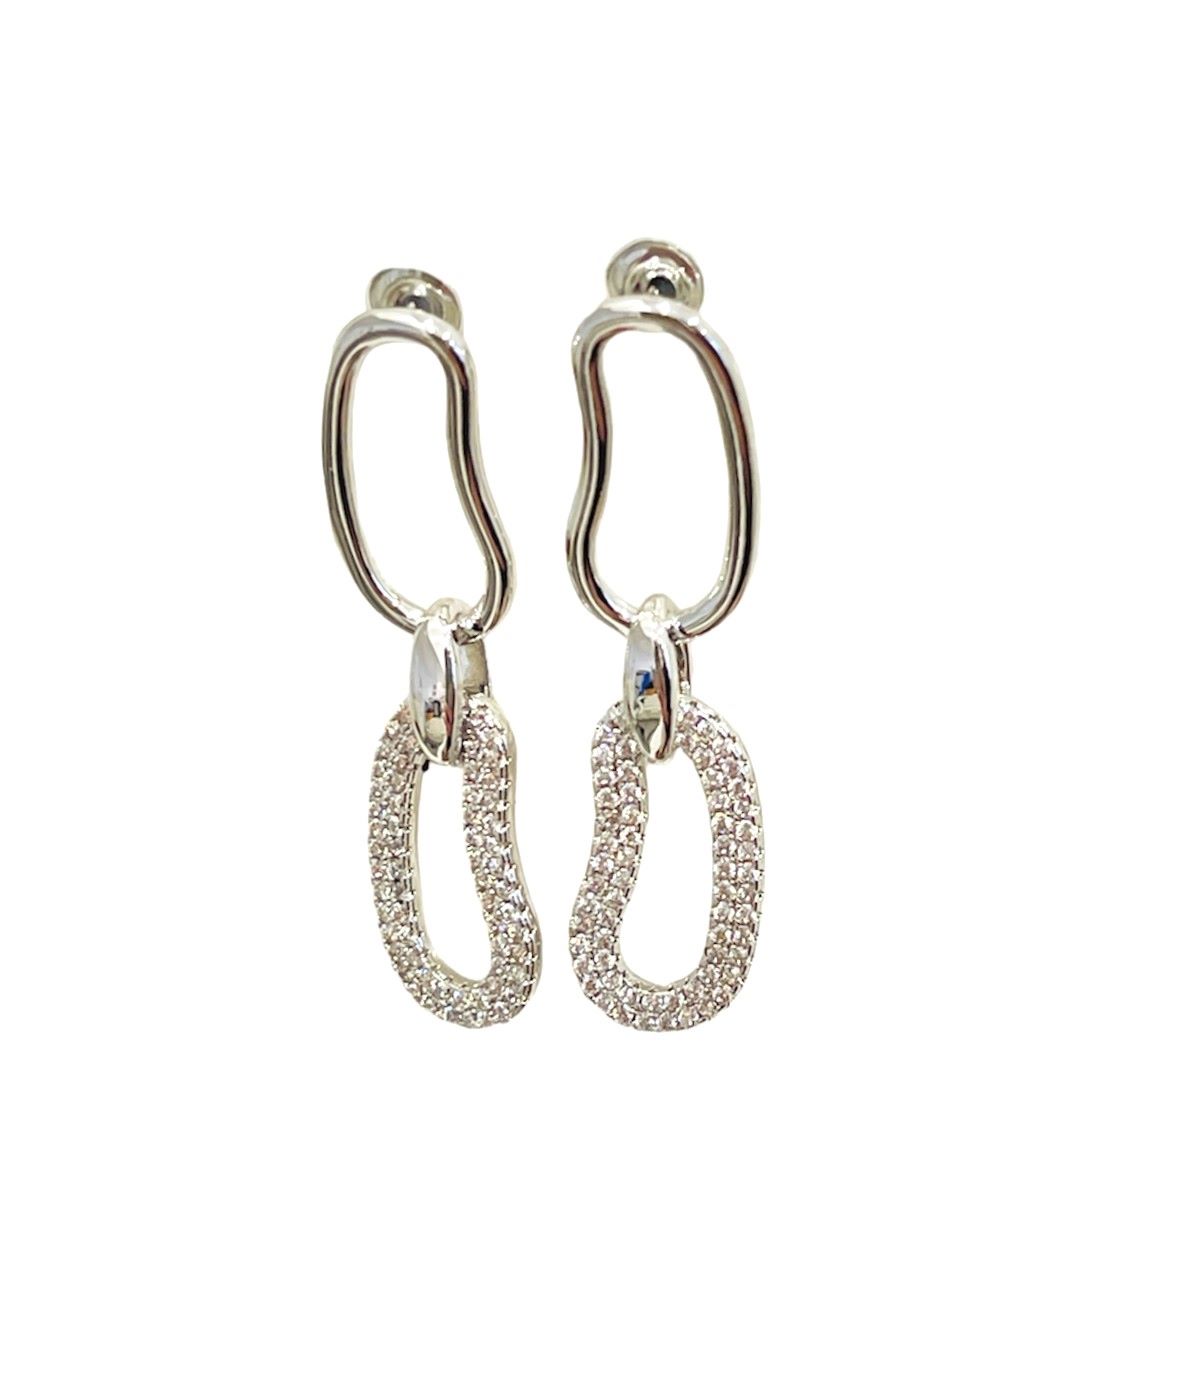 EARRING PLAIN WITH ZIRCON GOLD PLATED